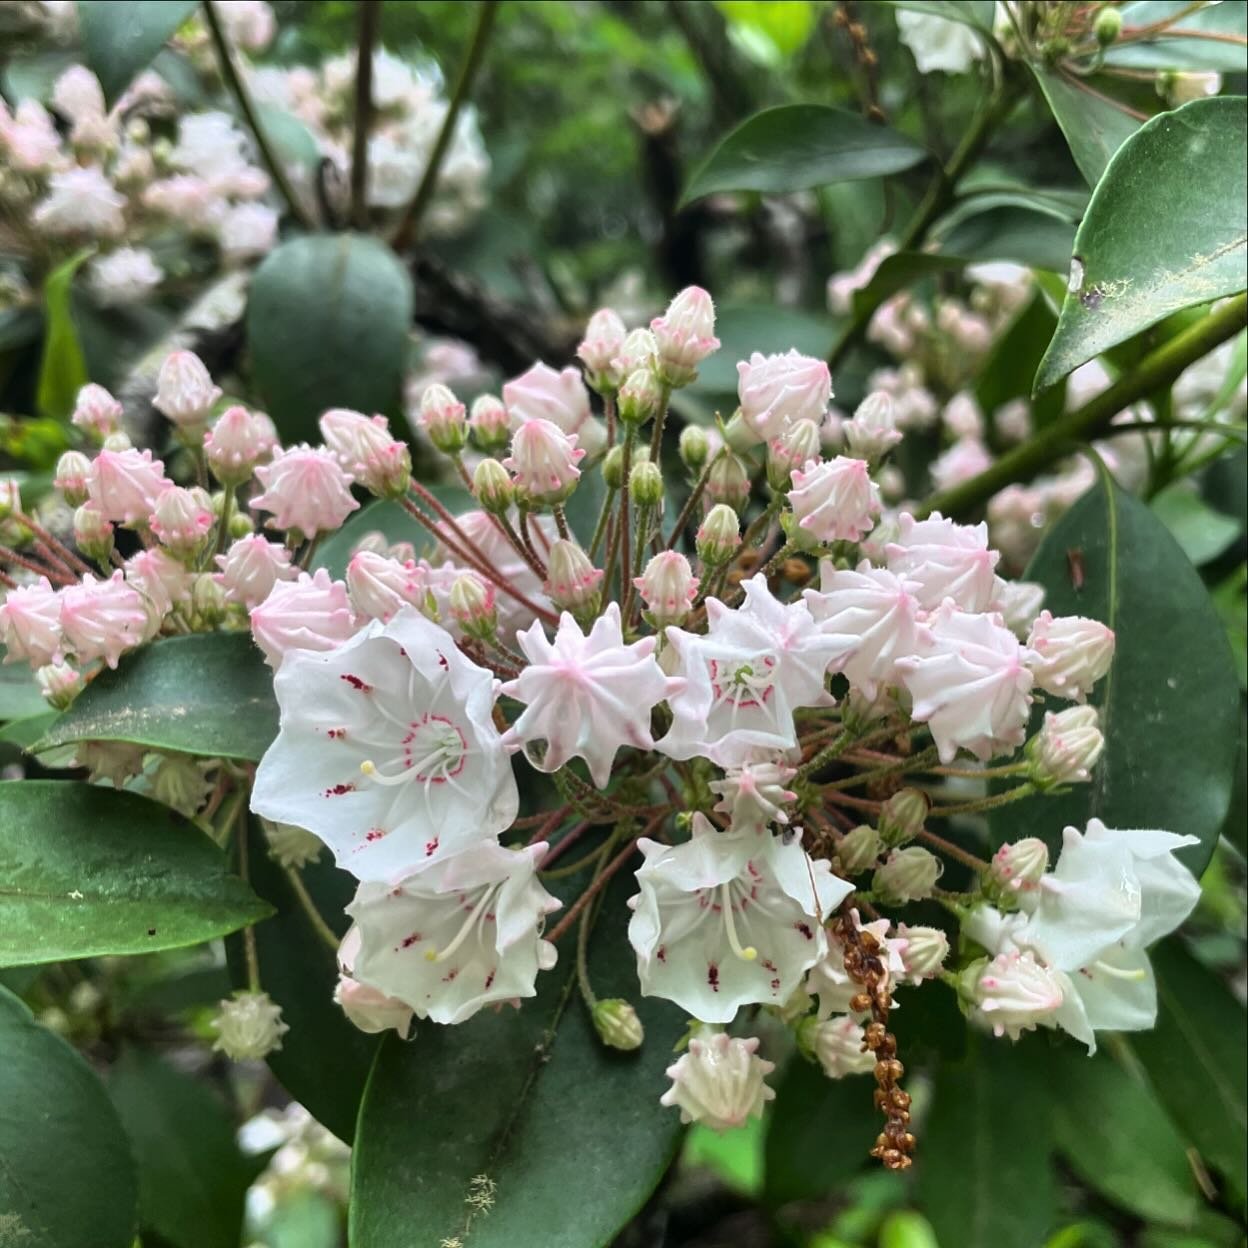 Pause to Notice ✨

Today I was walking the dog and my eye caught a plant I&rsquo;d never seen before. I was drawn in by the small, unique, and geometric blooms 🌸

Apparently it&rsquo;s mountain laurel, but that&rsquo;s not the whole point&hellip;

I